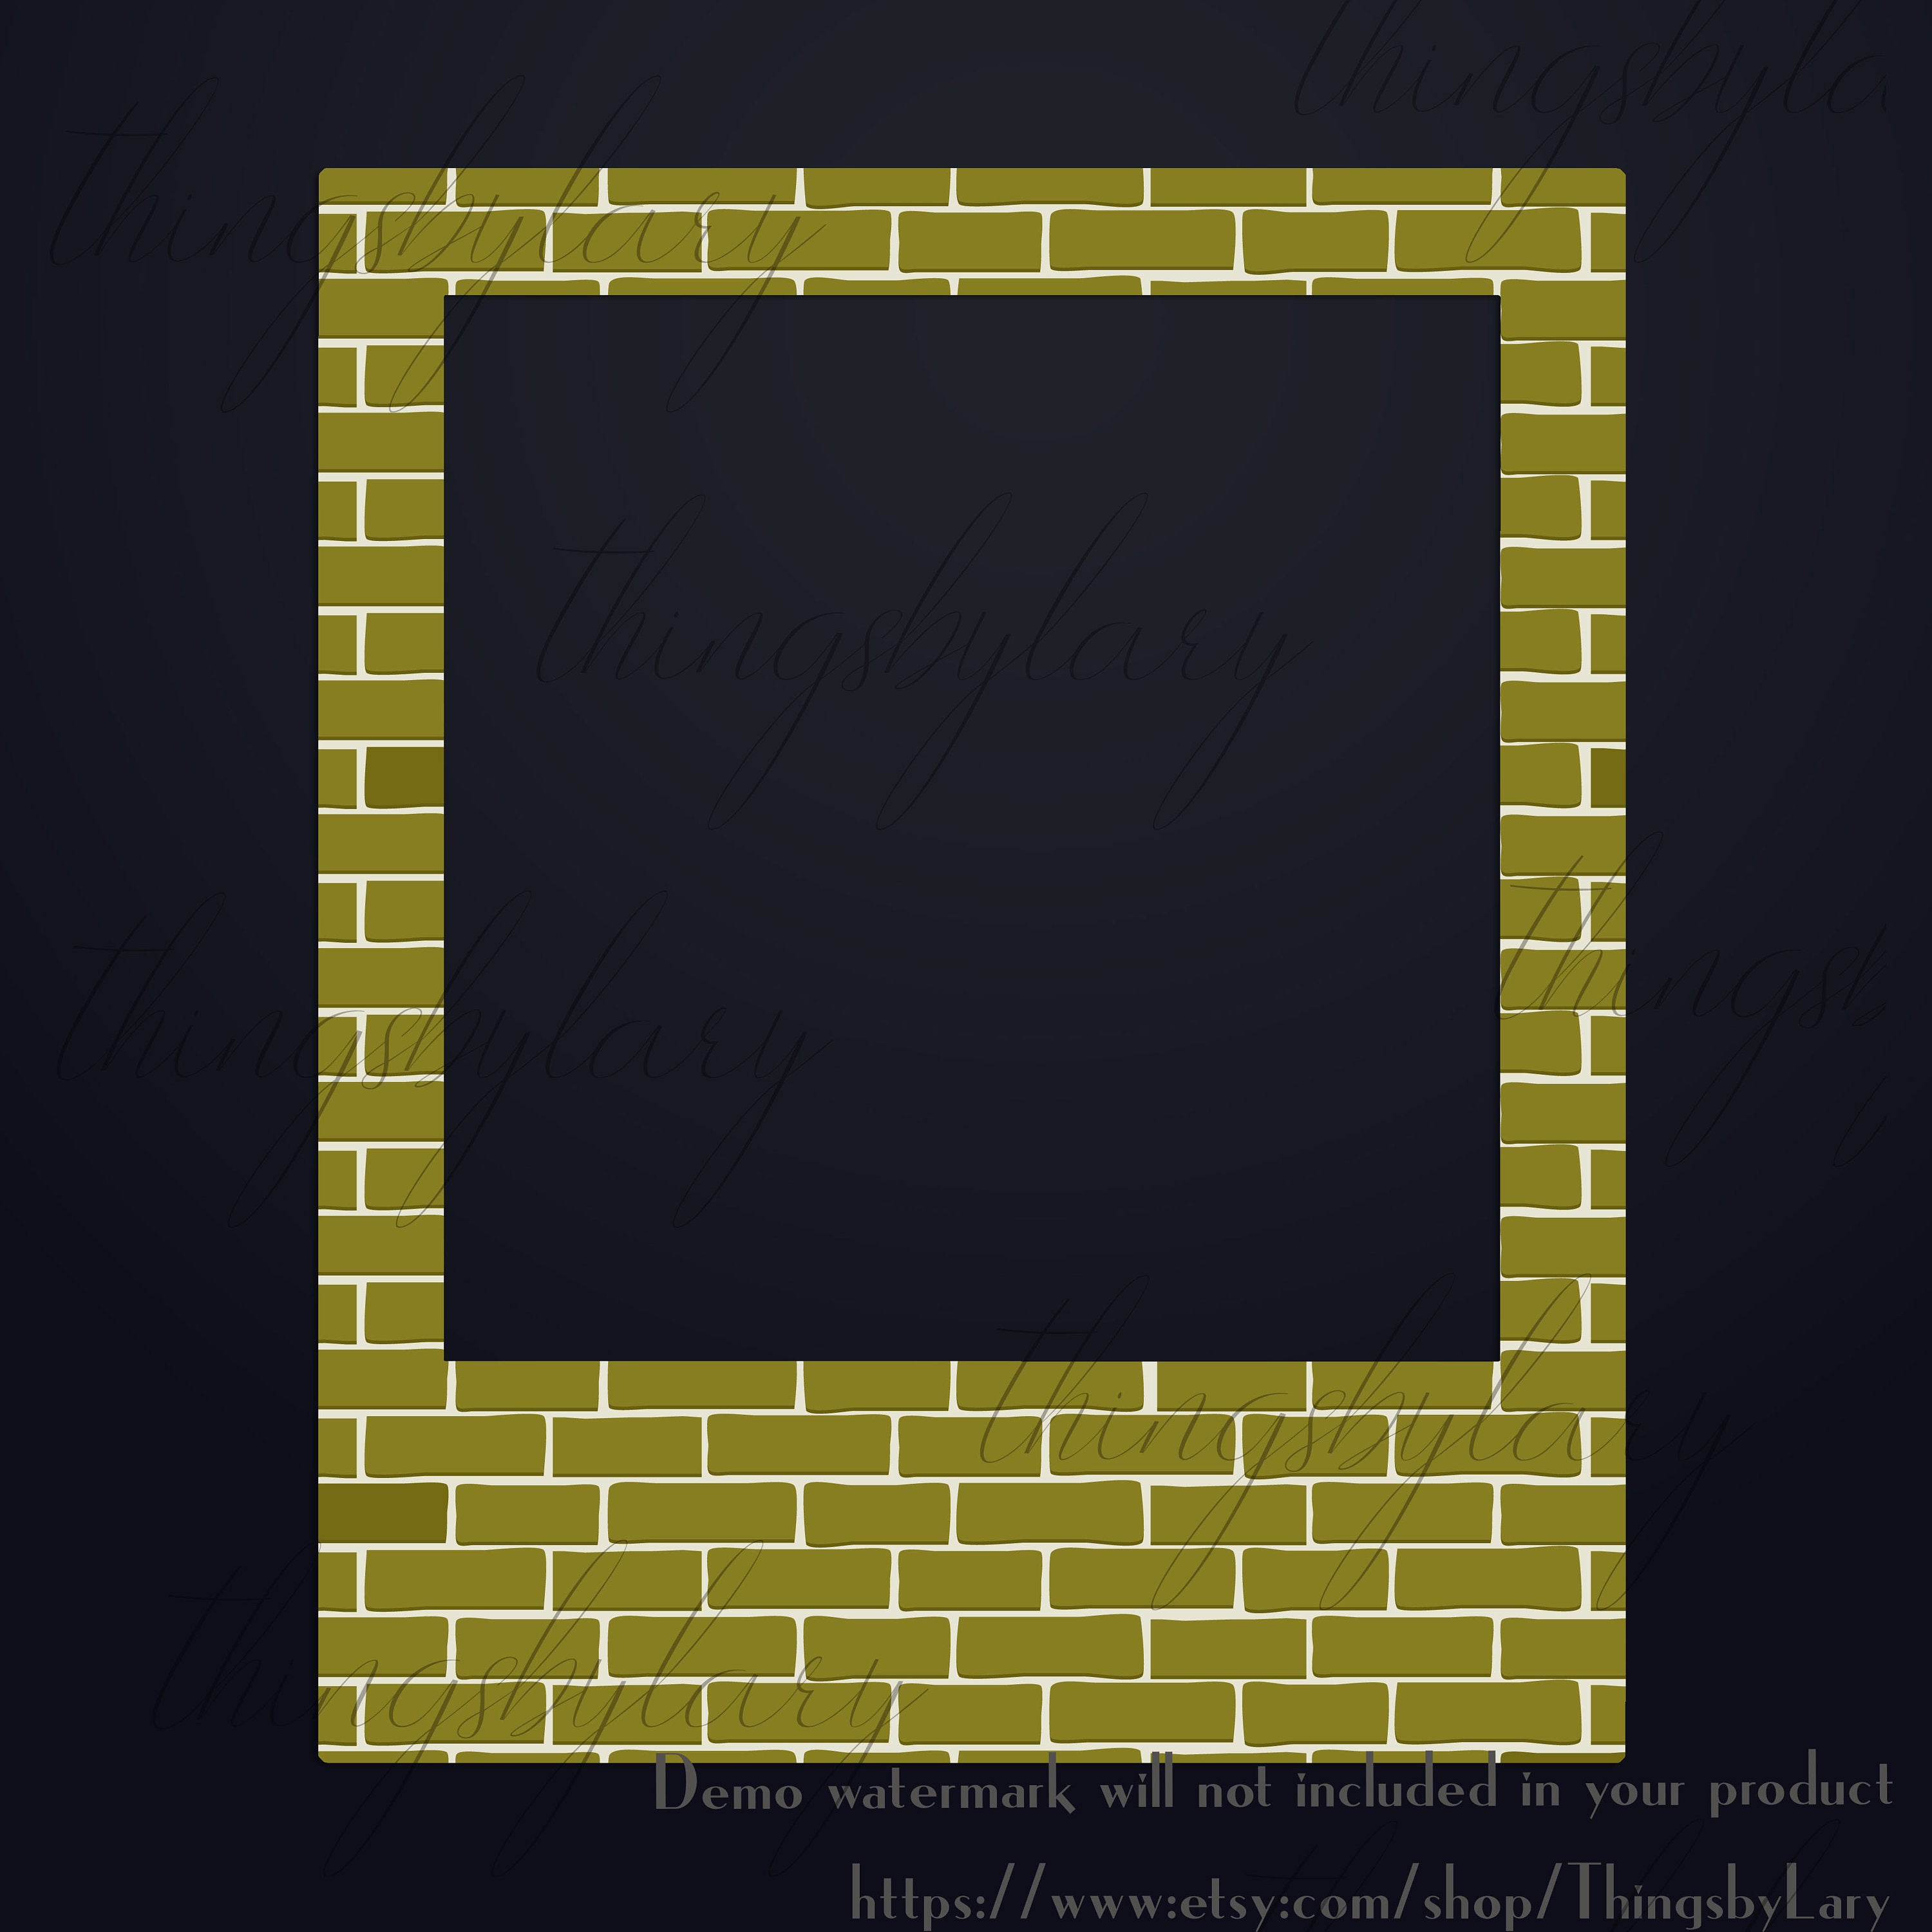 254 Brick Wall Photo Frames Clip arts 300 Dpi PNG Instant Download Commercial Use Bridal Shower Photo Booth Baby Shower Instagram